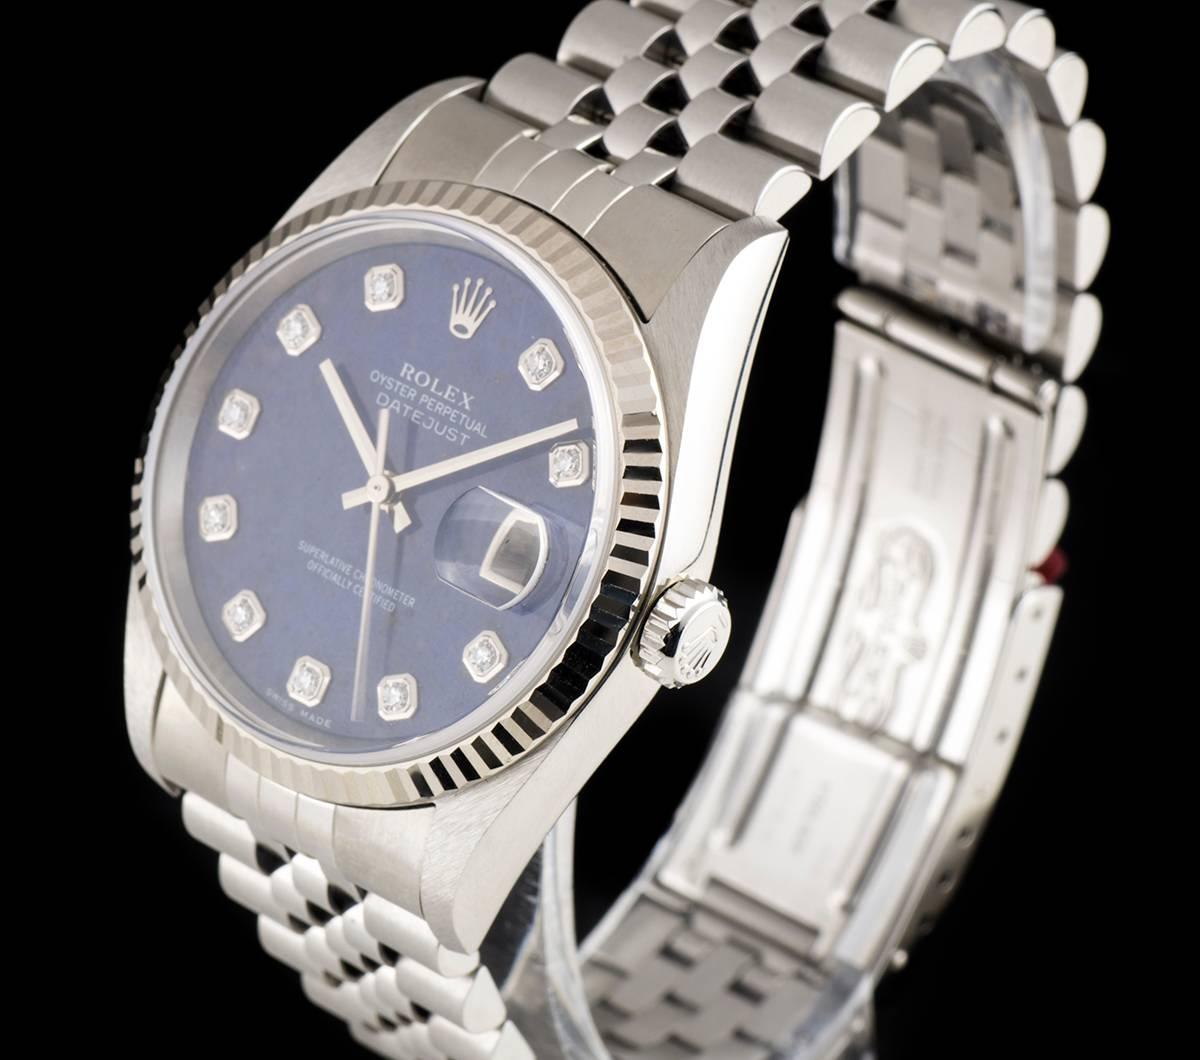 An Unworn Stainless Steel Oyster Perpetual Datejust NOS Gents Wristwatch, rare sodalite dial with 10 applied round brilliant cut diamond hour markers, date at 3 0'clock, a fixed 18k white gold fluted bezel, a stainless steel jubilee bracelet with a